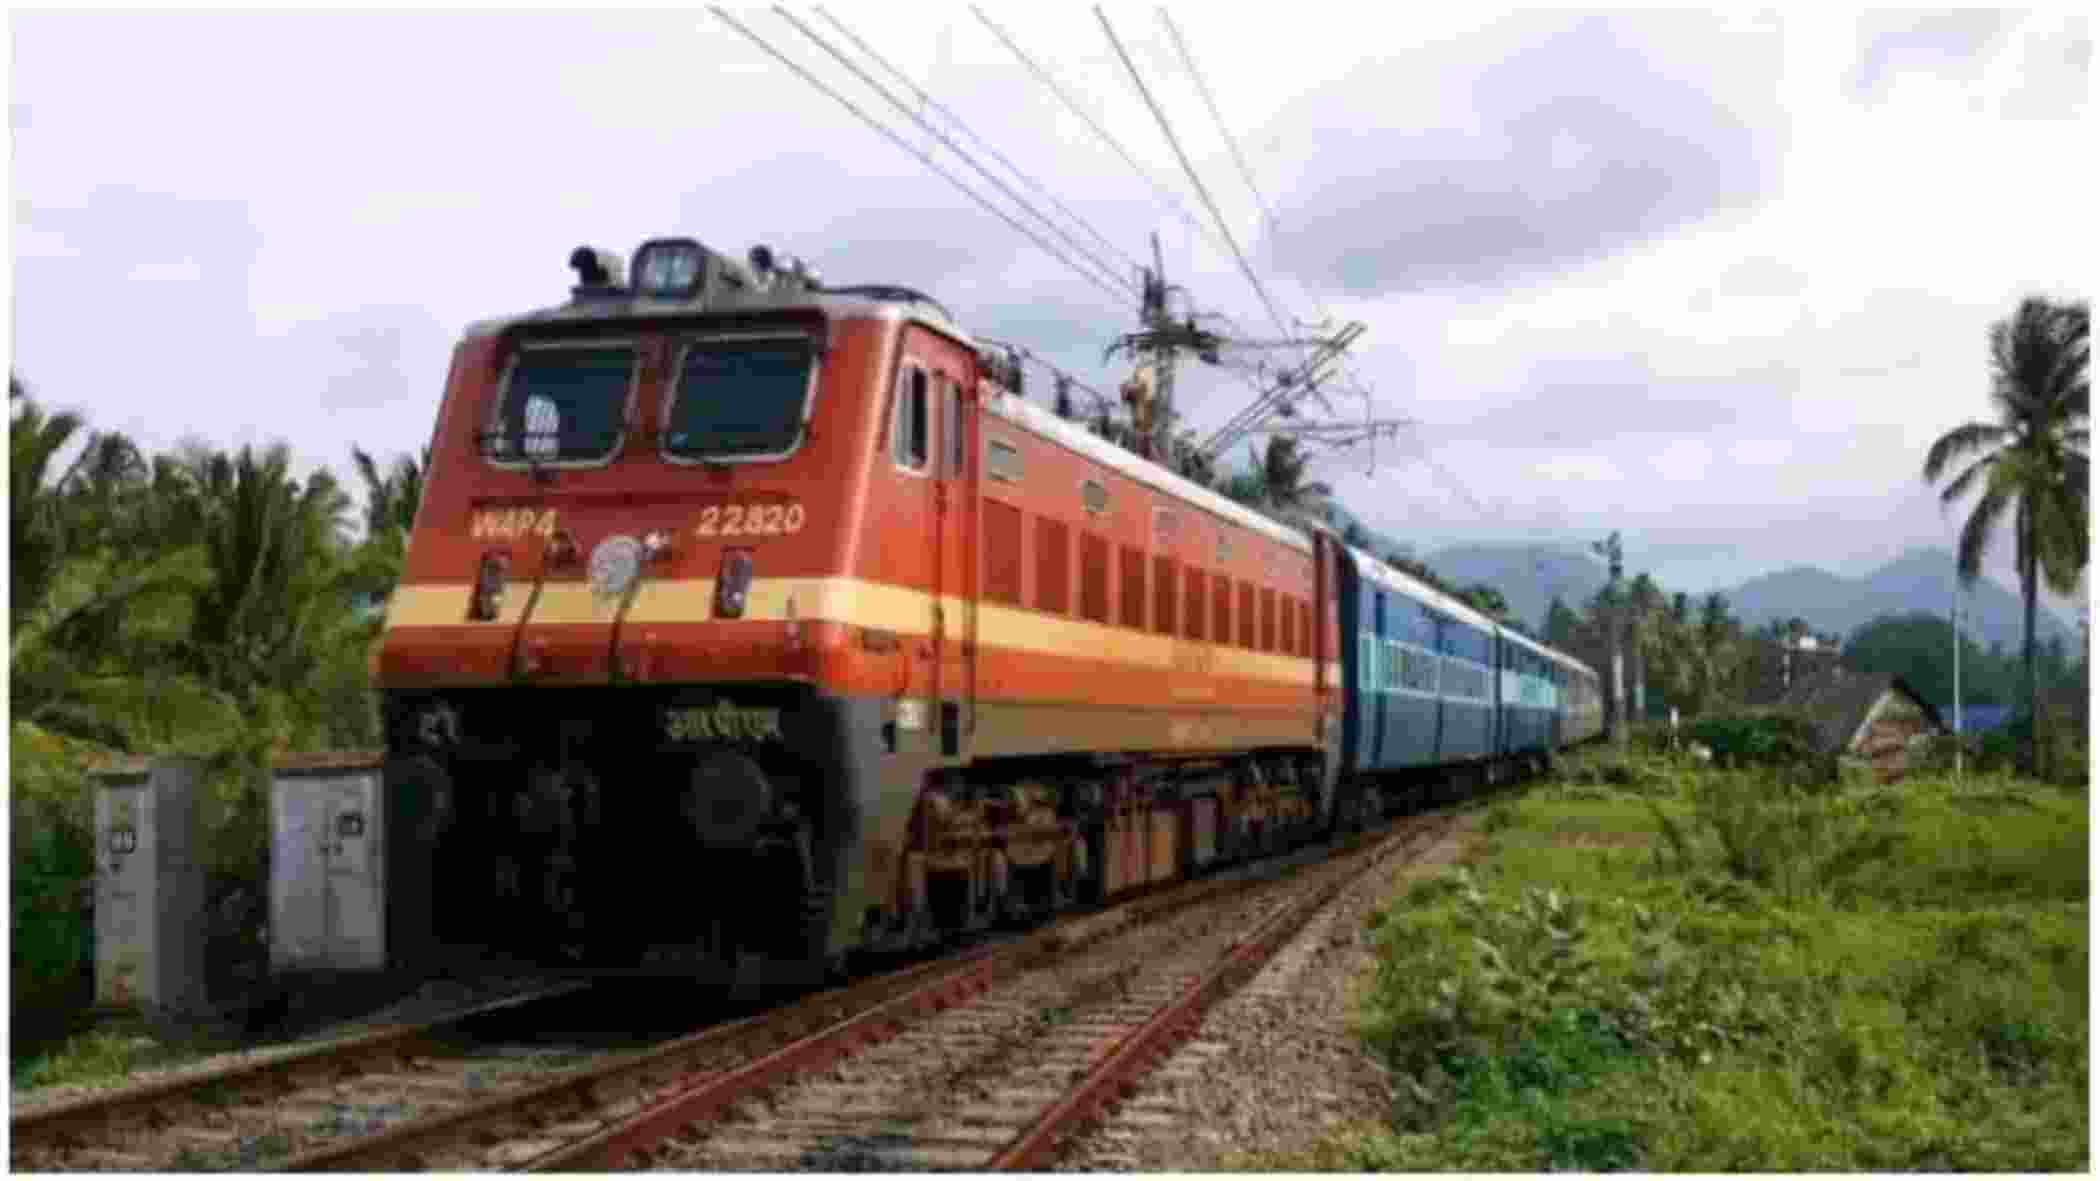 Indian Railways has decided to increase train services to Jammu and introduce new trains starting from July 3 to accommodate the influx of pilgrims.